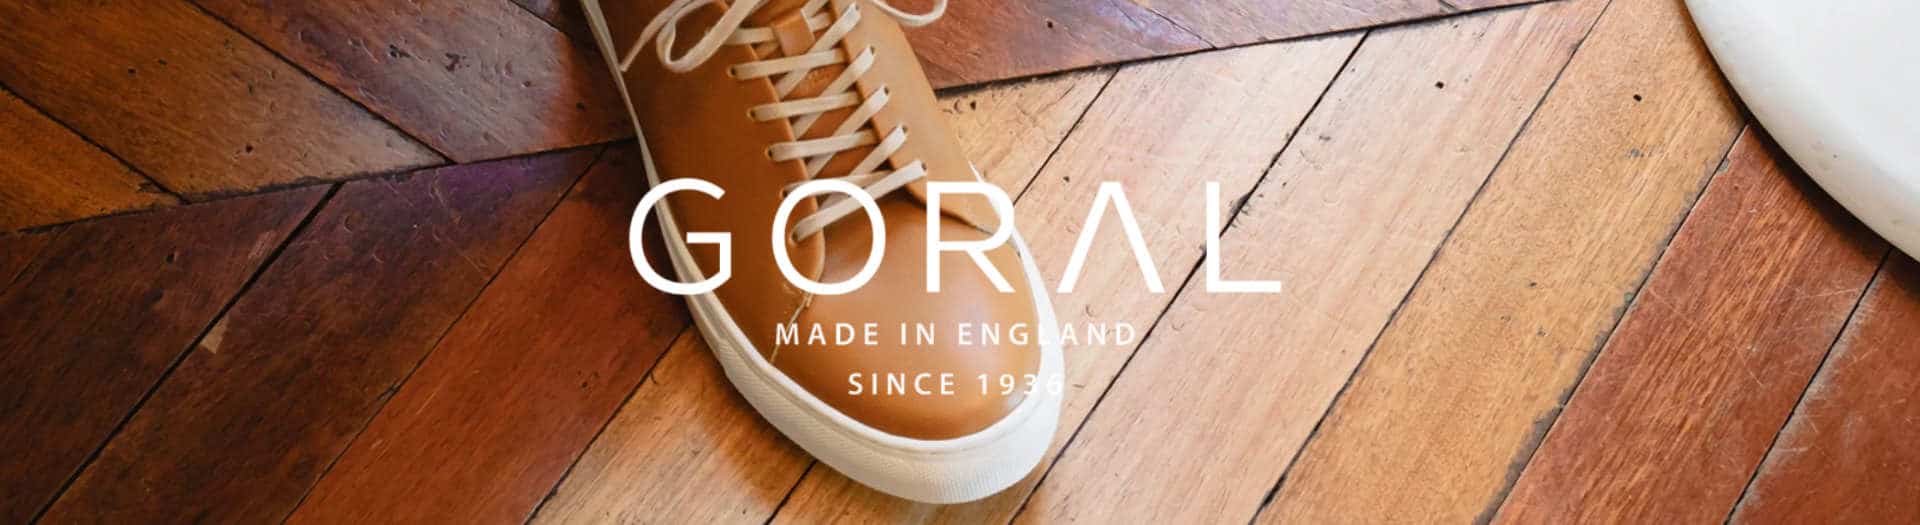 Goral Footwear made in sheffiled made in Uk trainers with white Goral logo